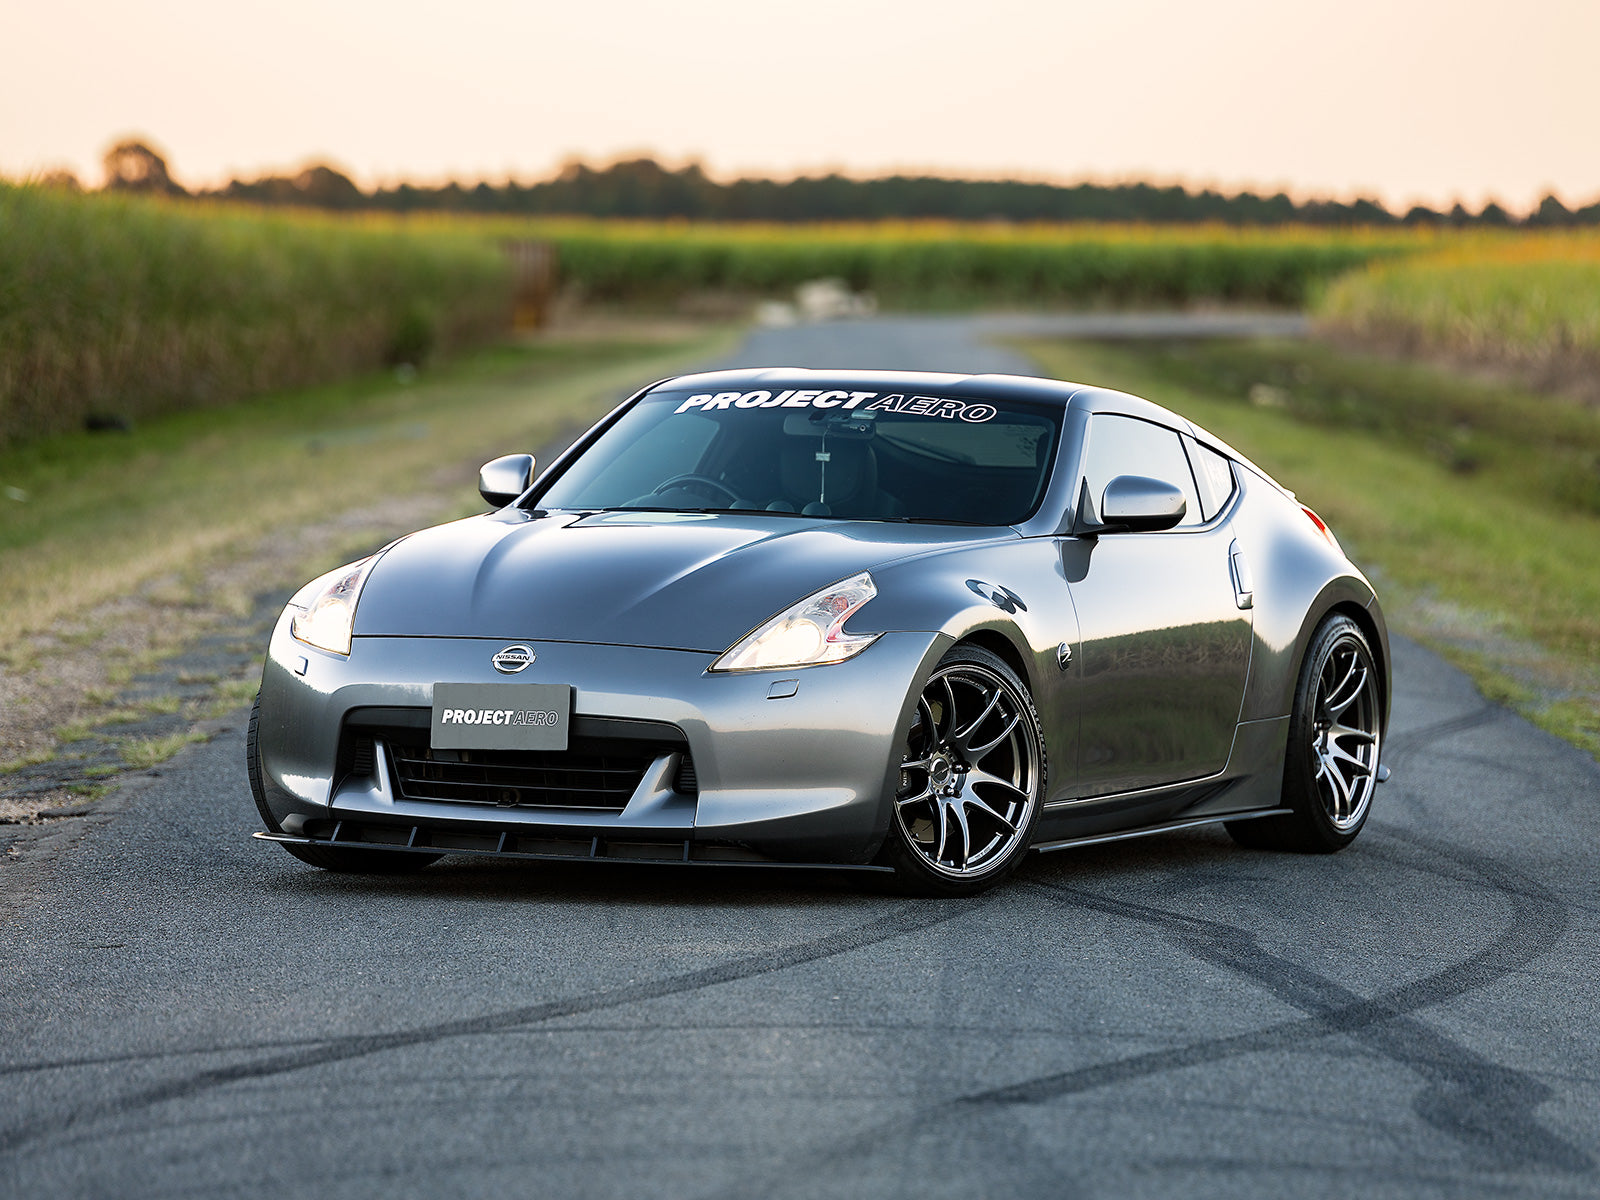 Complete splitter lip kit to suit the Nissan 370z. Splitters are a perfect addition to any 370z